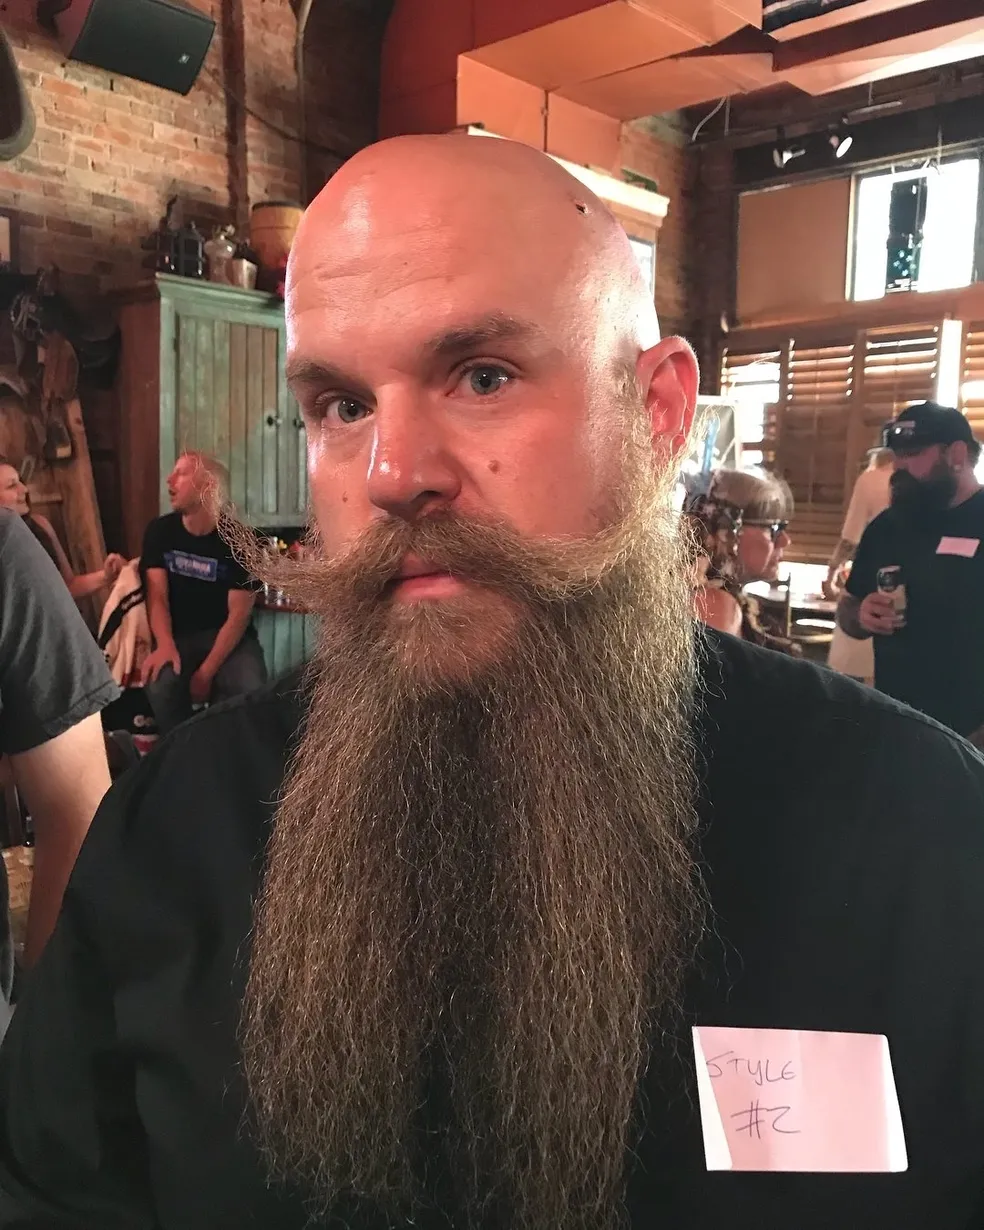 A bald man with long beard and mustache.